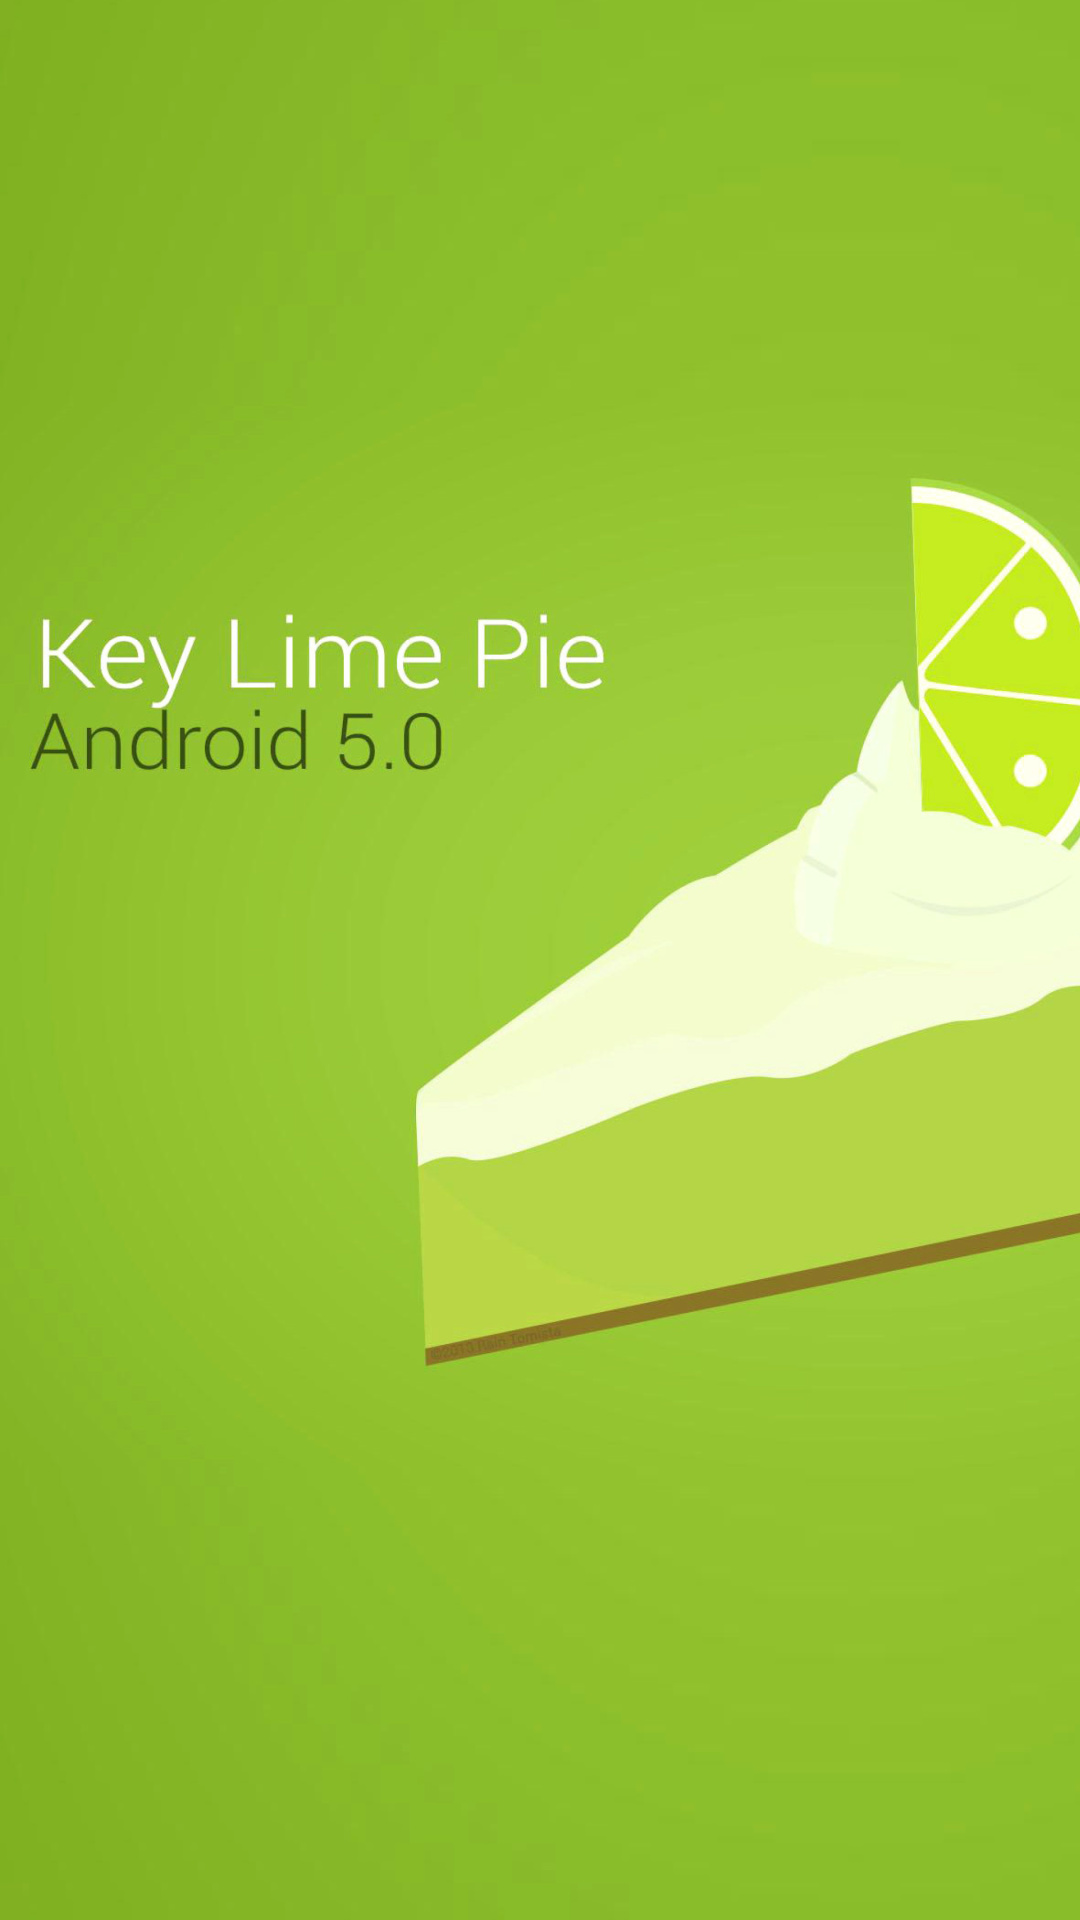 Concept Android 5.0 Key Lime Pie screenshot #1 1080x1920